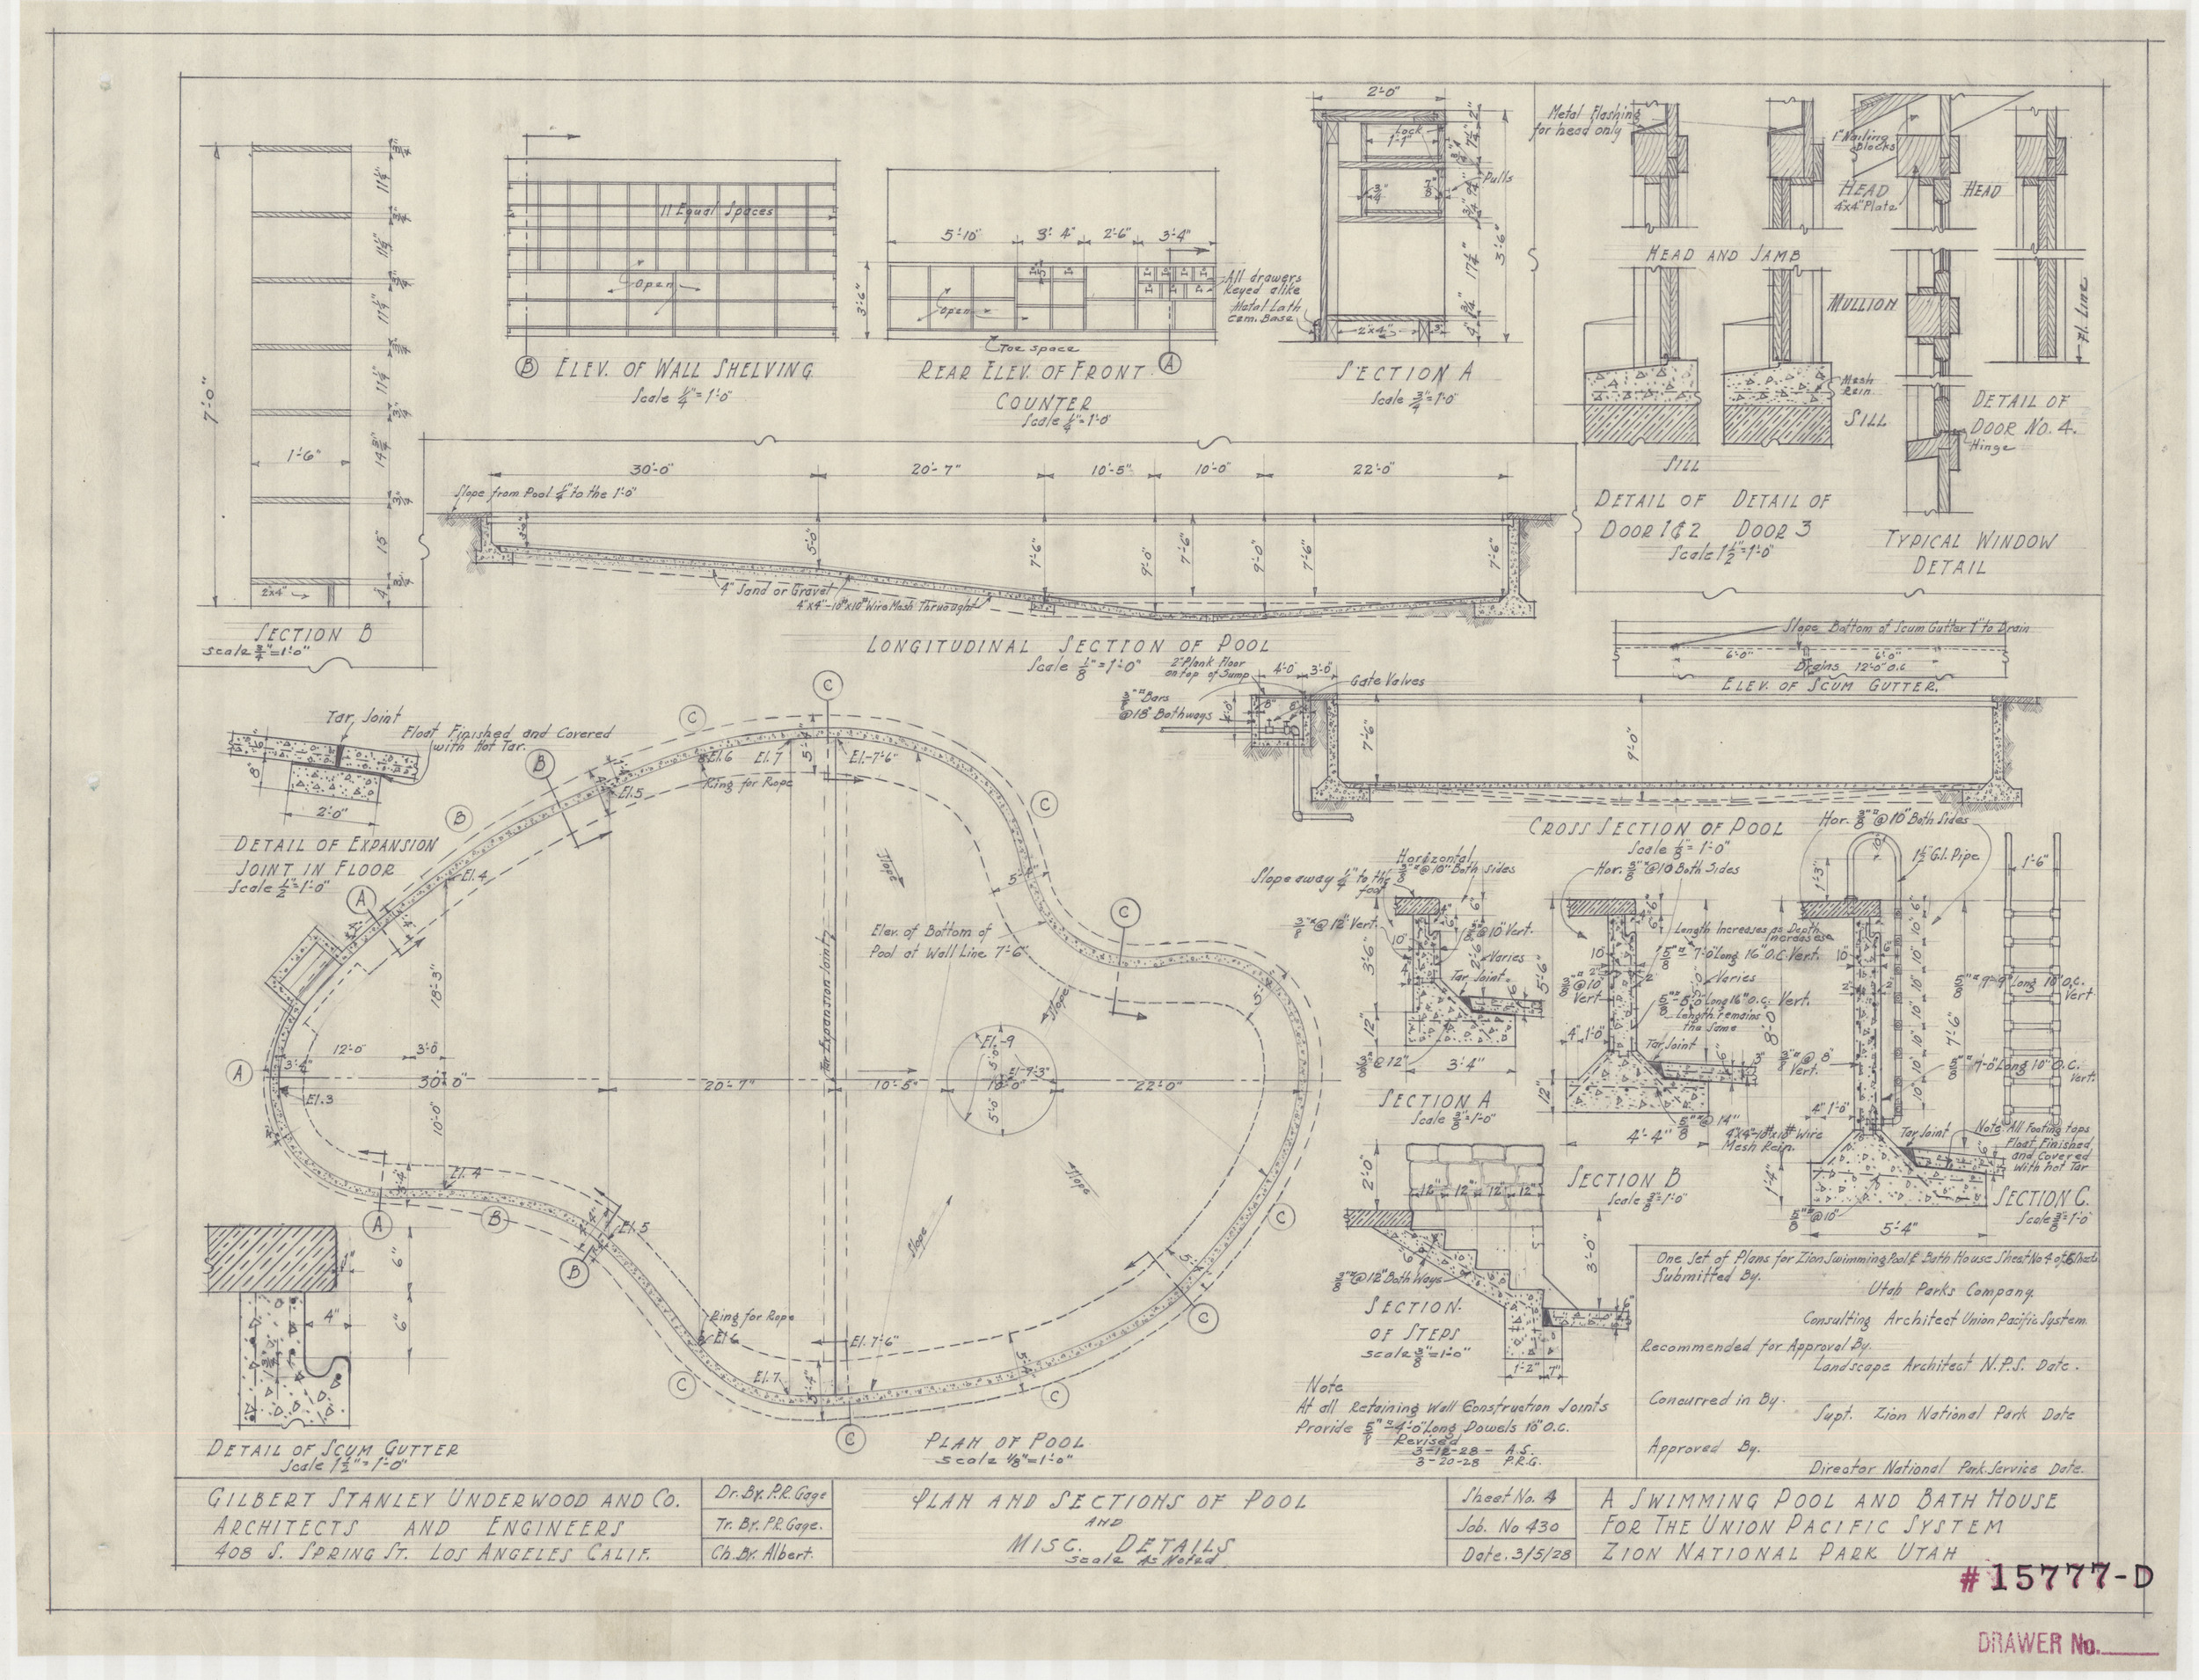 Architectural drawing of swimming pool & bath house at Zion National Park, Utah, floor plan, March 5, 1928, sheet no. 4, plan sections of pool and miscellaneous details